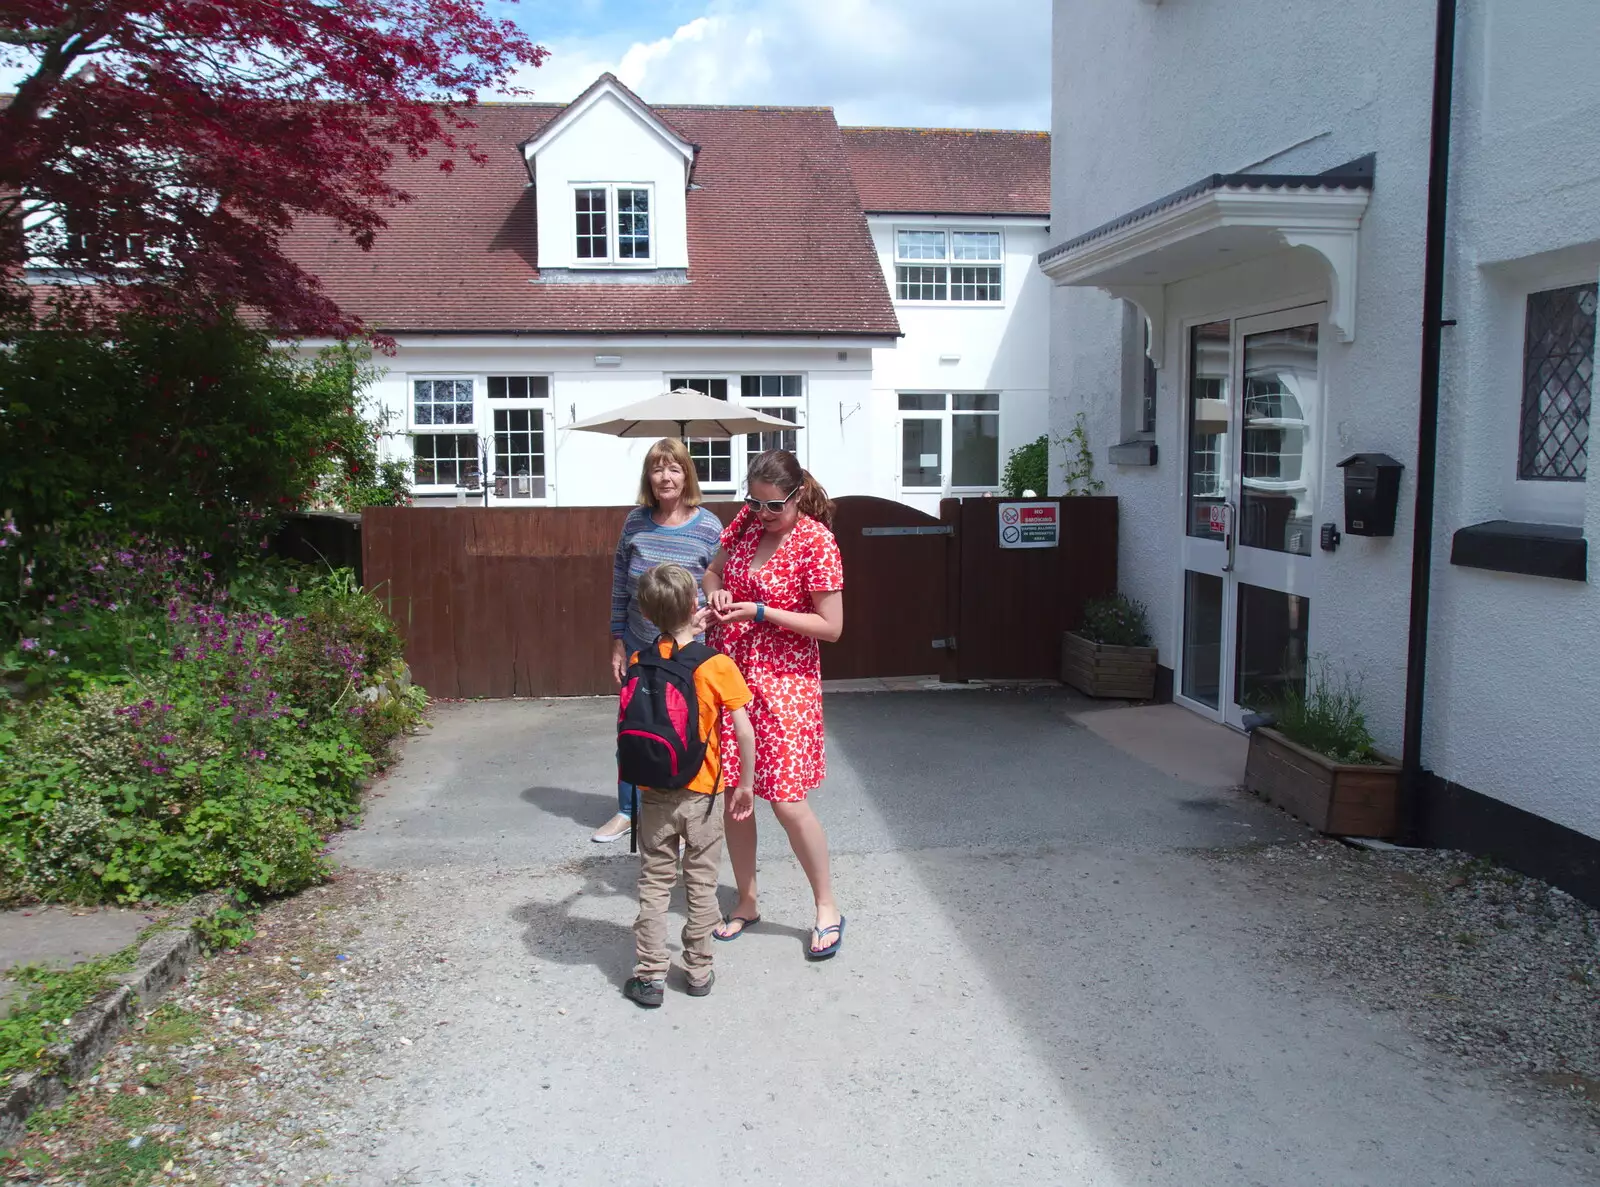 Outside Mother's pad, from Chagford Lido and a Trip to Parke, Bovey Tracey, Devon - 25th May 2019